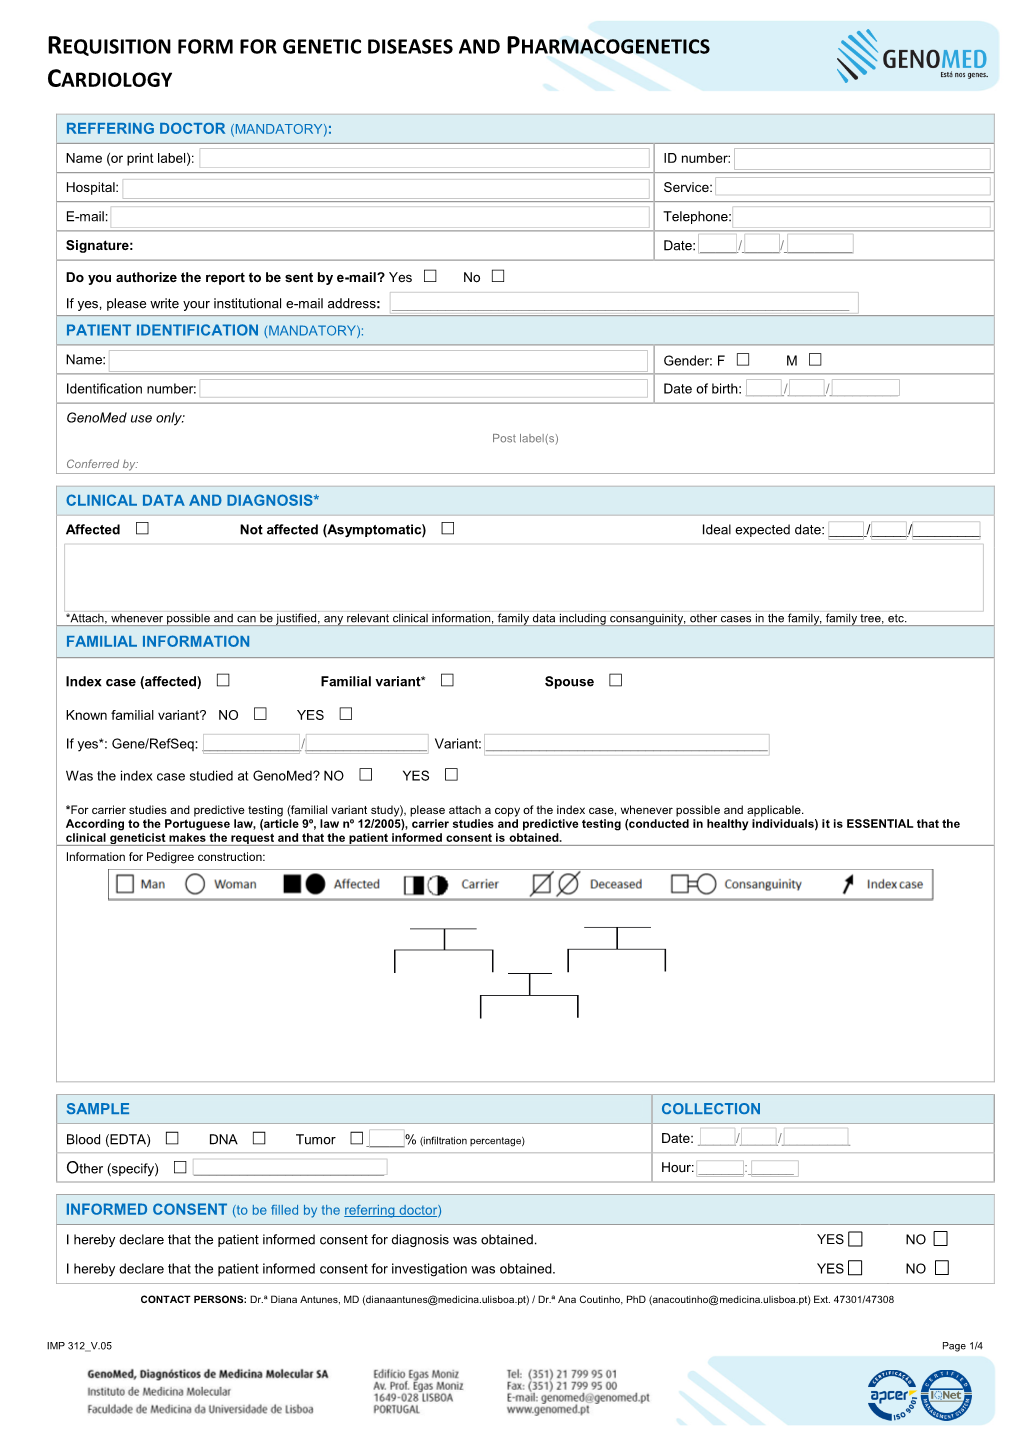 Requisition Form for Genetic Diseases and Pharmacogenetics Cardiology